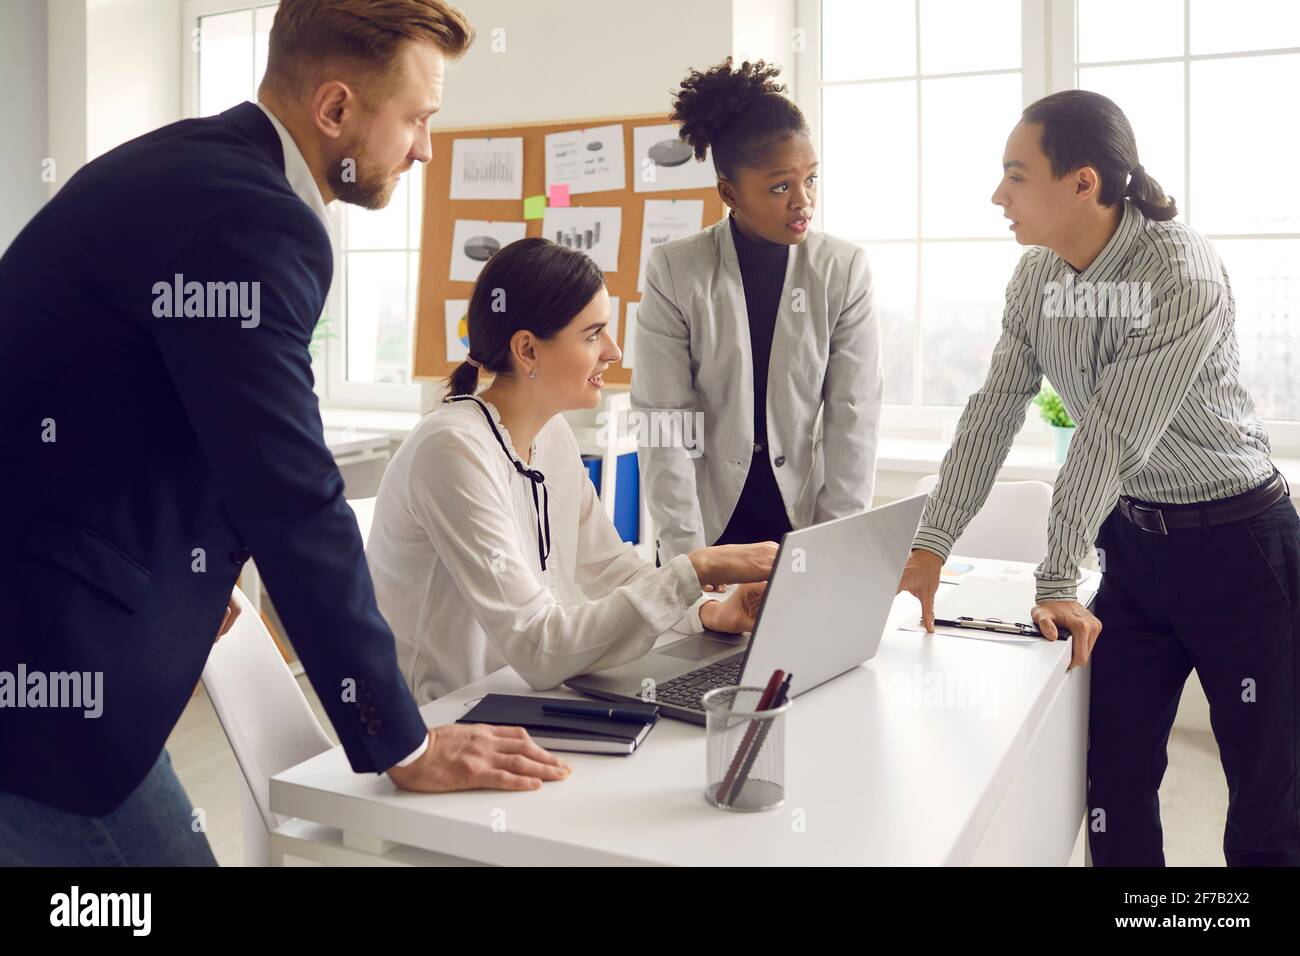 Group of multiracial business people discussing project, sharing ideas and using laptop Stock Photo